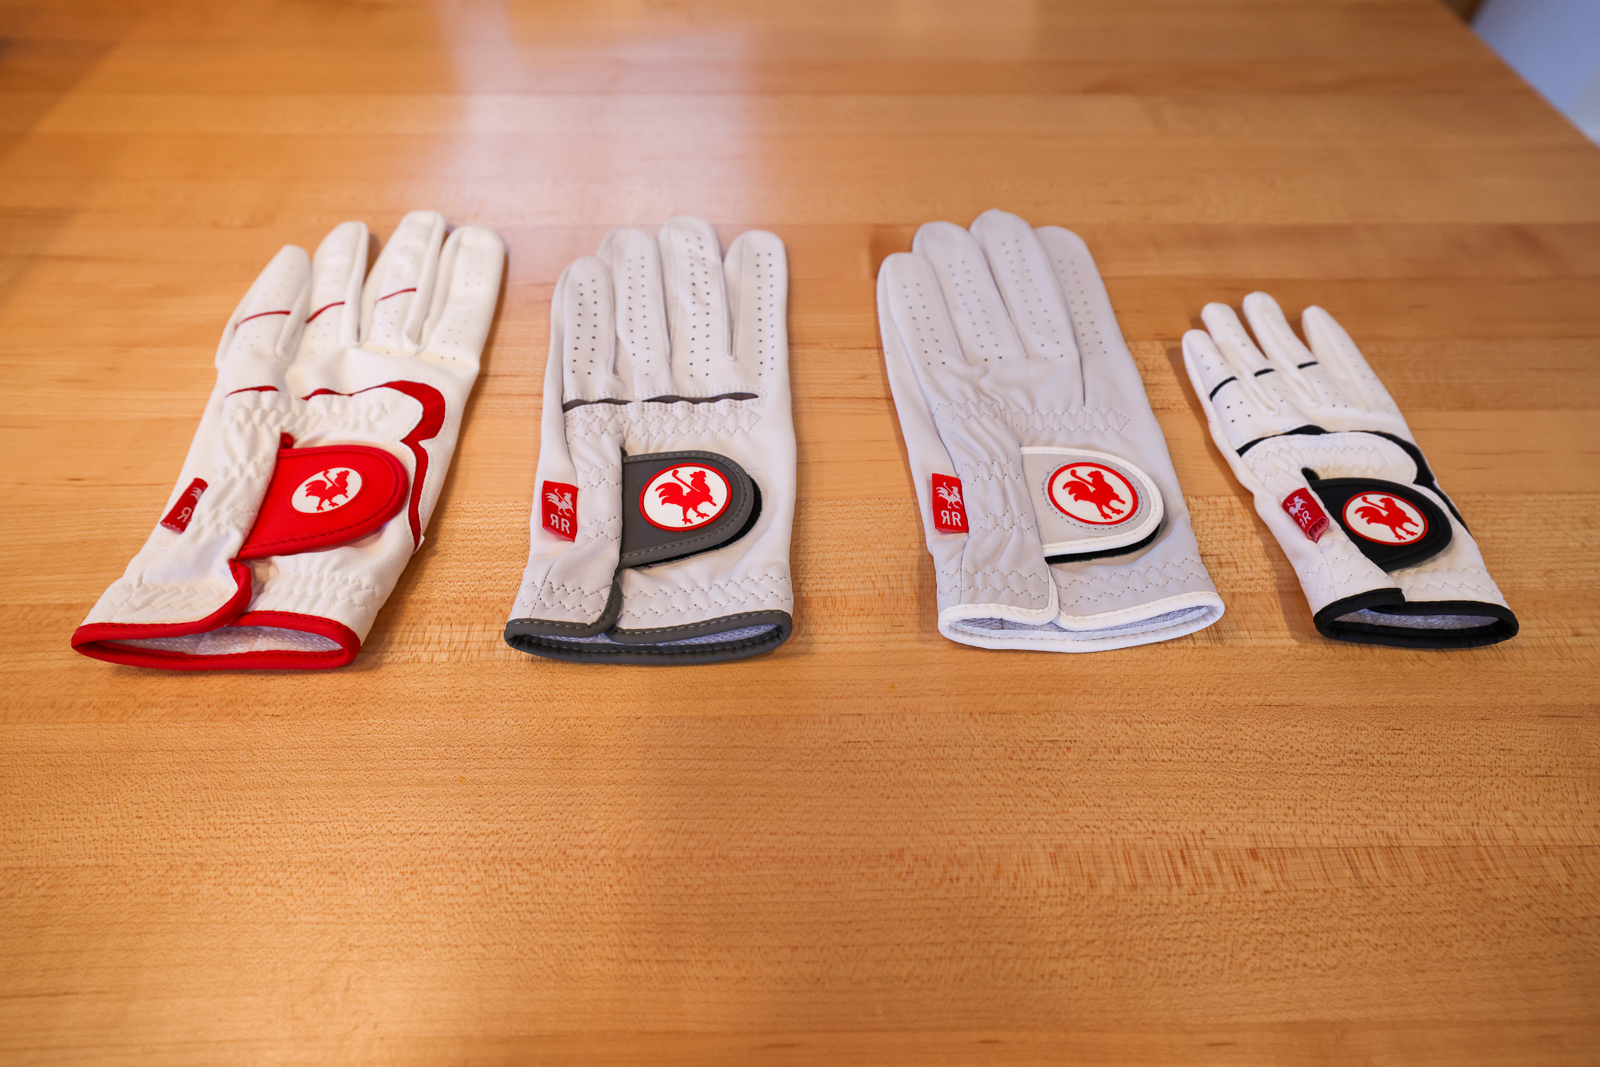 A collection of Red Rooster golf gloves.